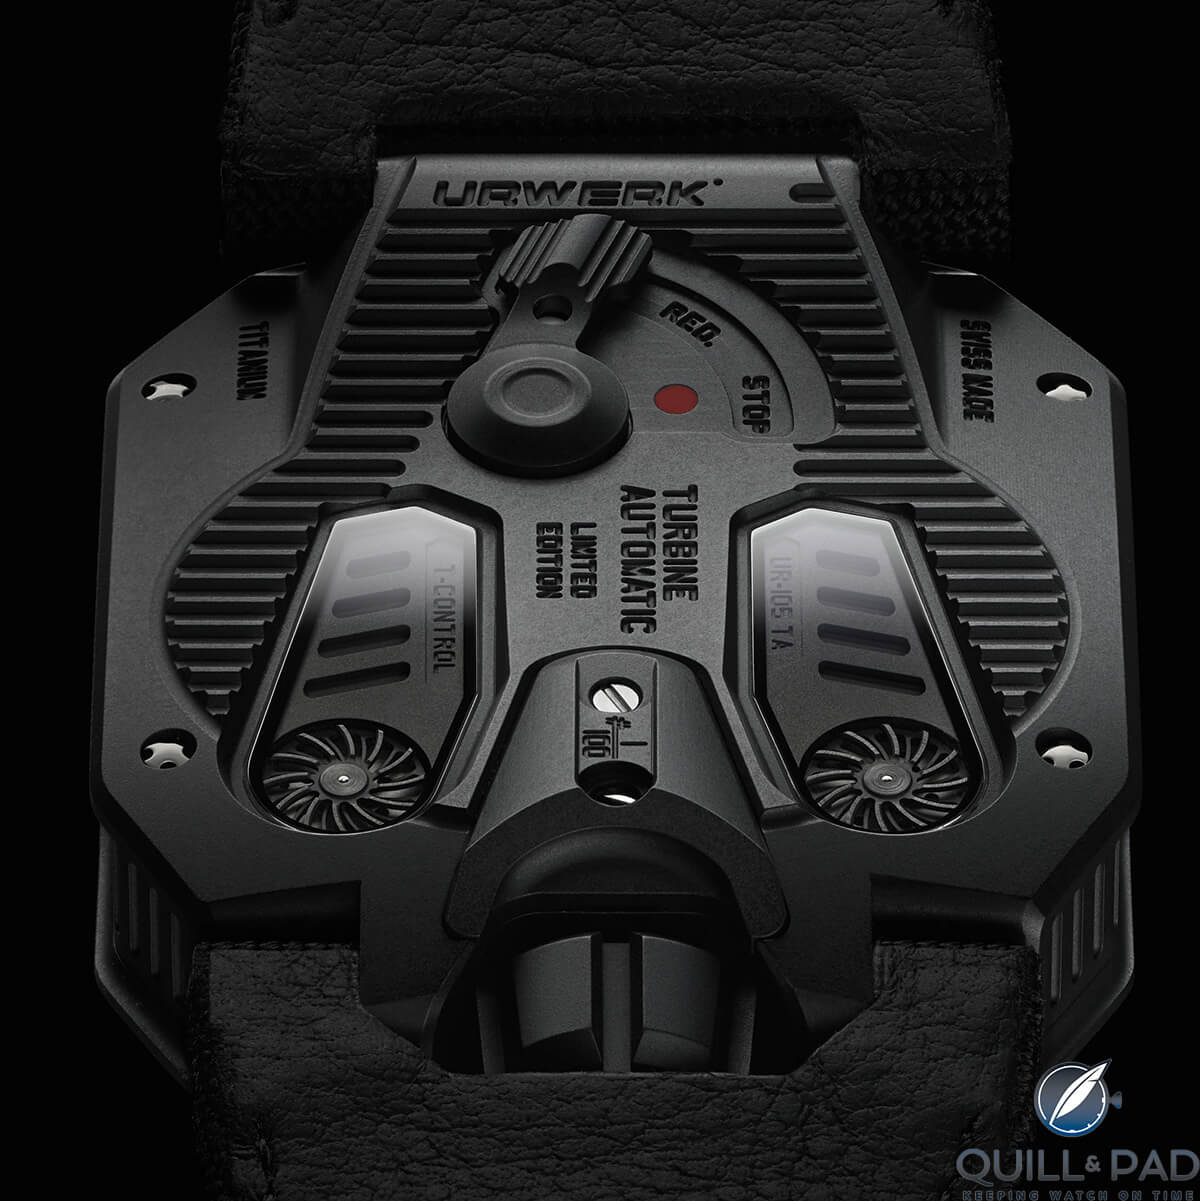 Back of the Urwerk UR-105 T-Rex with the automatic winding selector at the top, now set to FULL, with RED (reduced) and STOP as other options